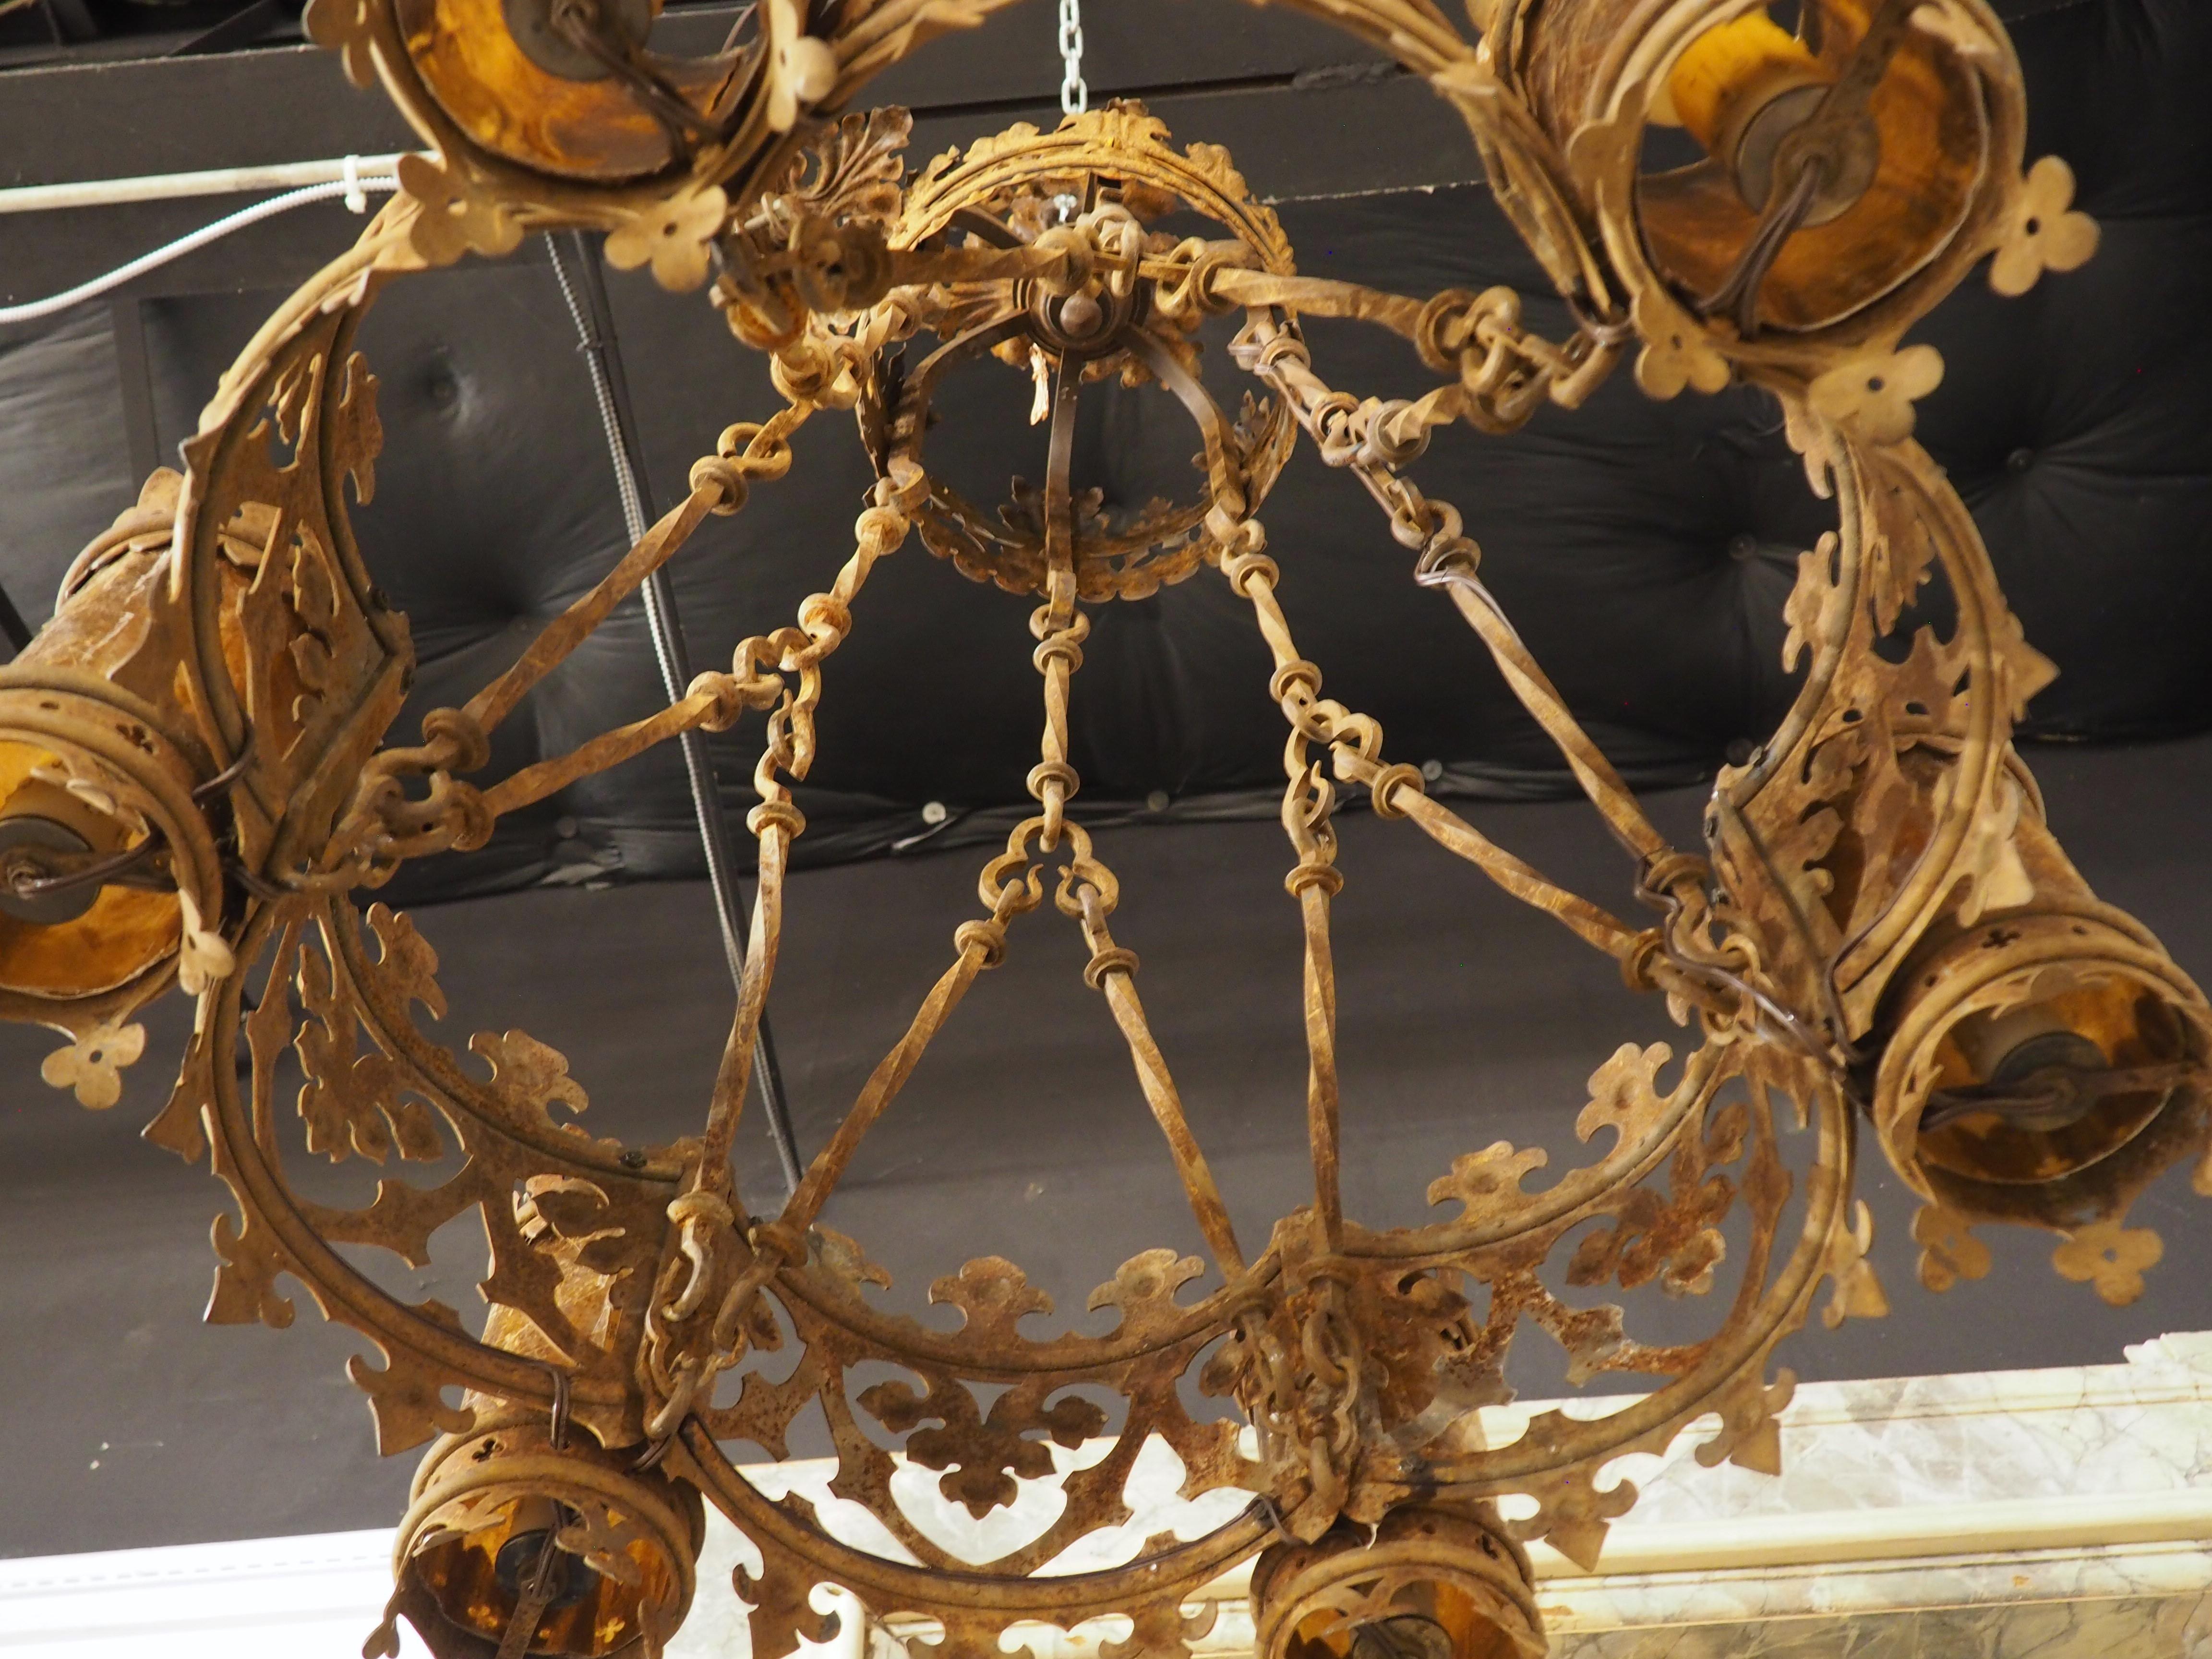 A beautiful example of the Gothic style, from circa 1900 France, this wrought iron chandelier has six luminaires, each surrounded by an amber reflector. All luminaires are set within two bands of angular crenellation and trefoil arcading. The main